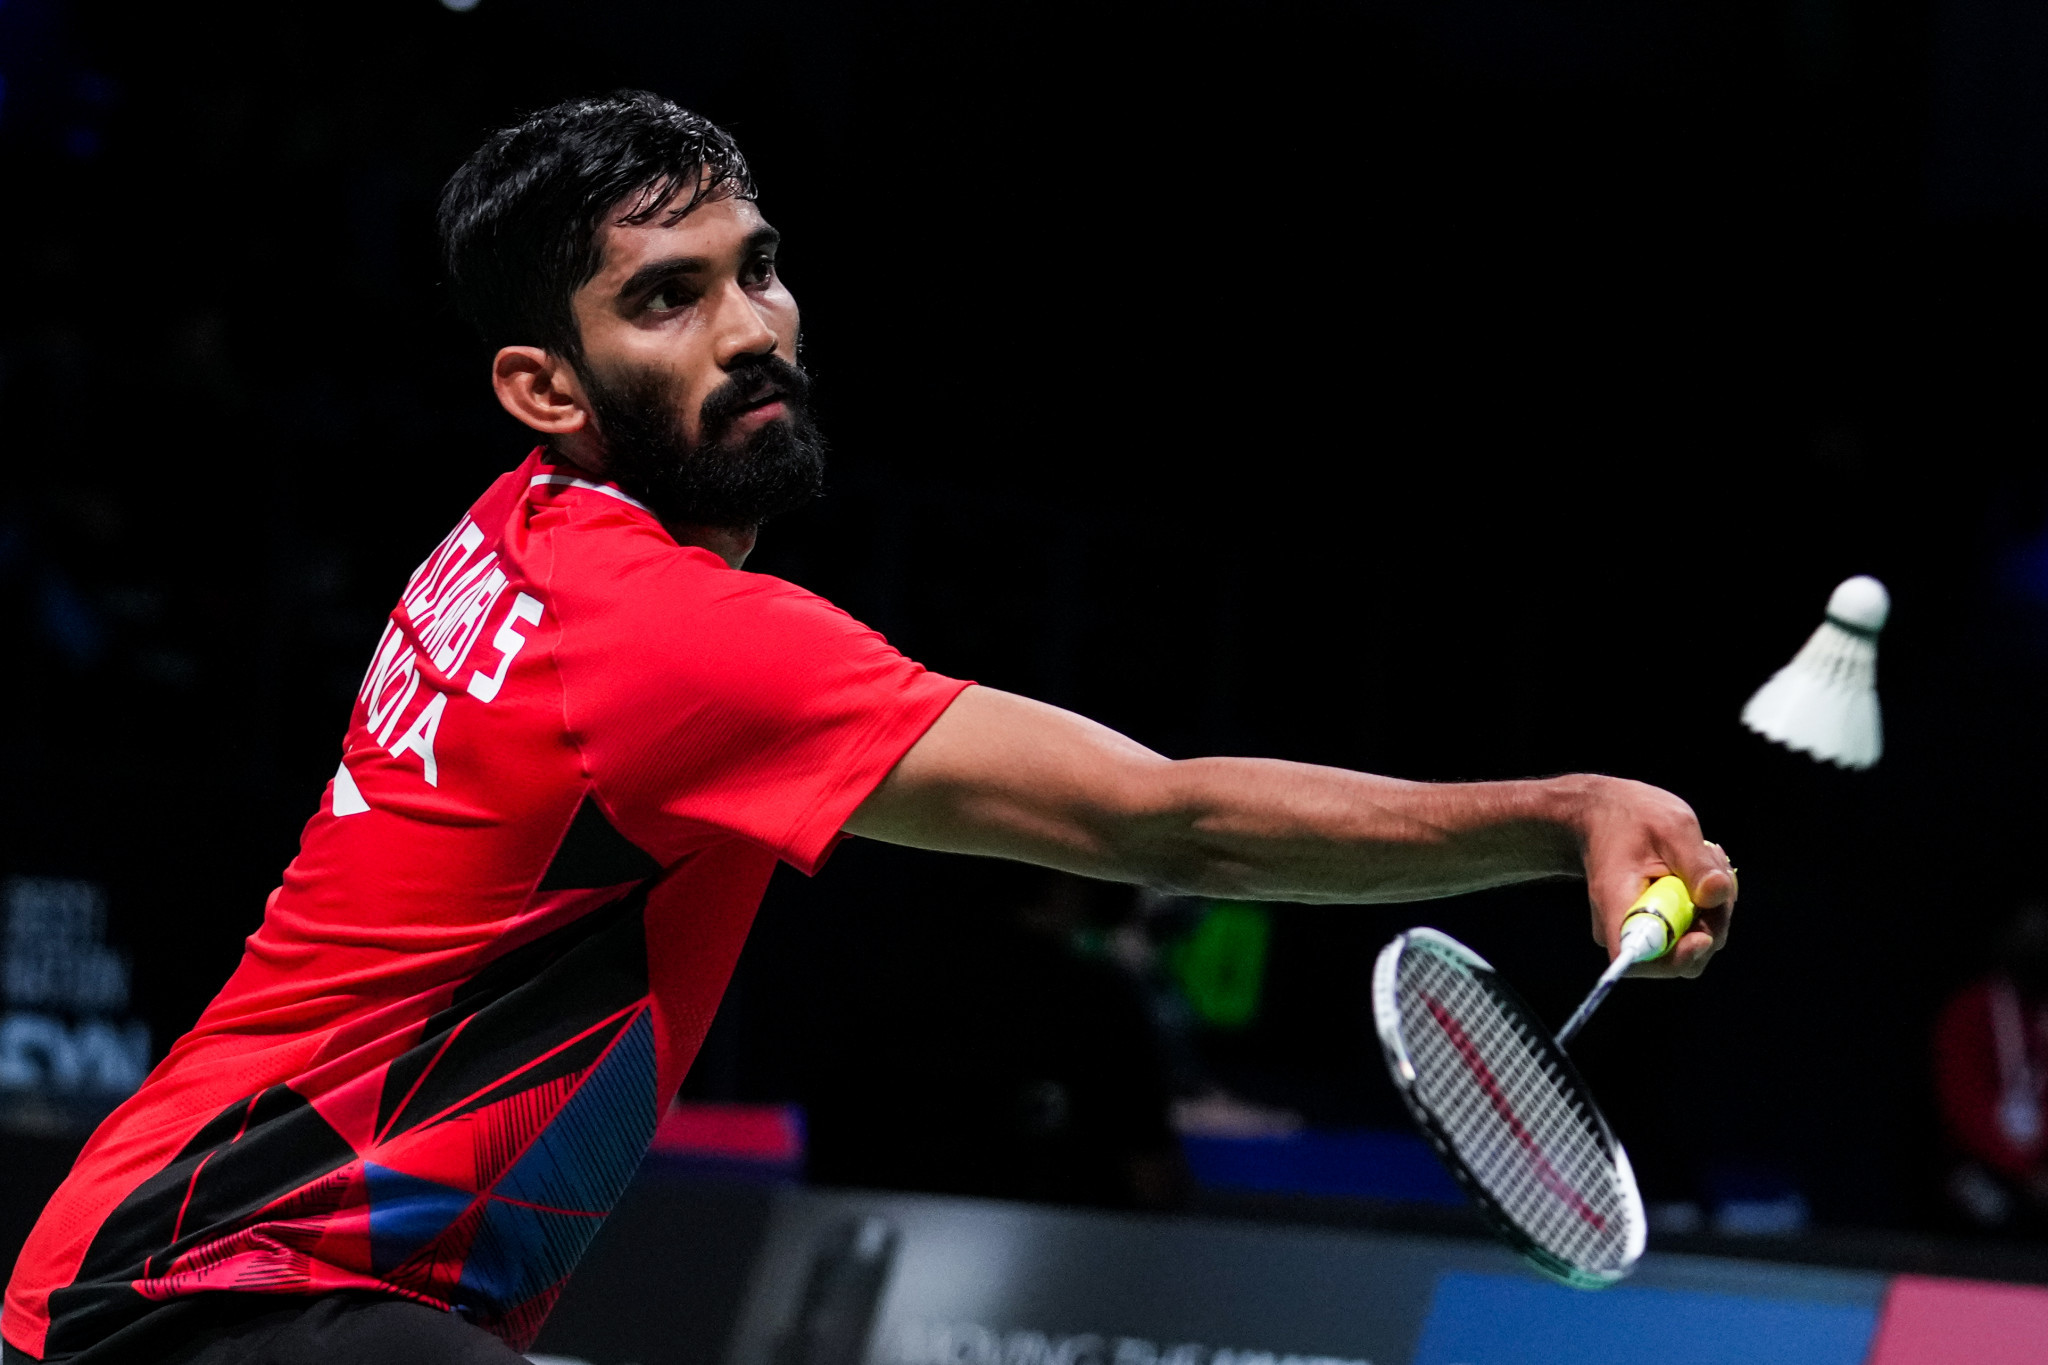 Srikanth Kidambi advanced to the men's singles semi-finals ©Getty Images